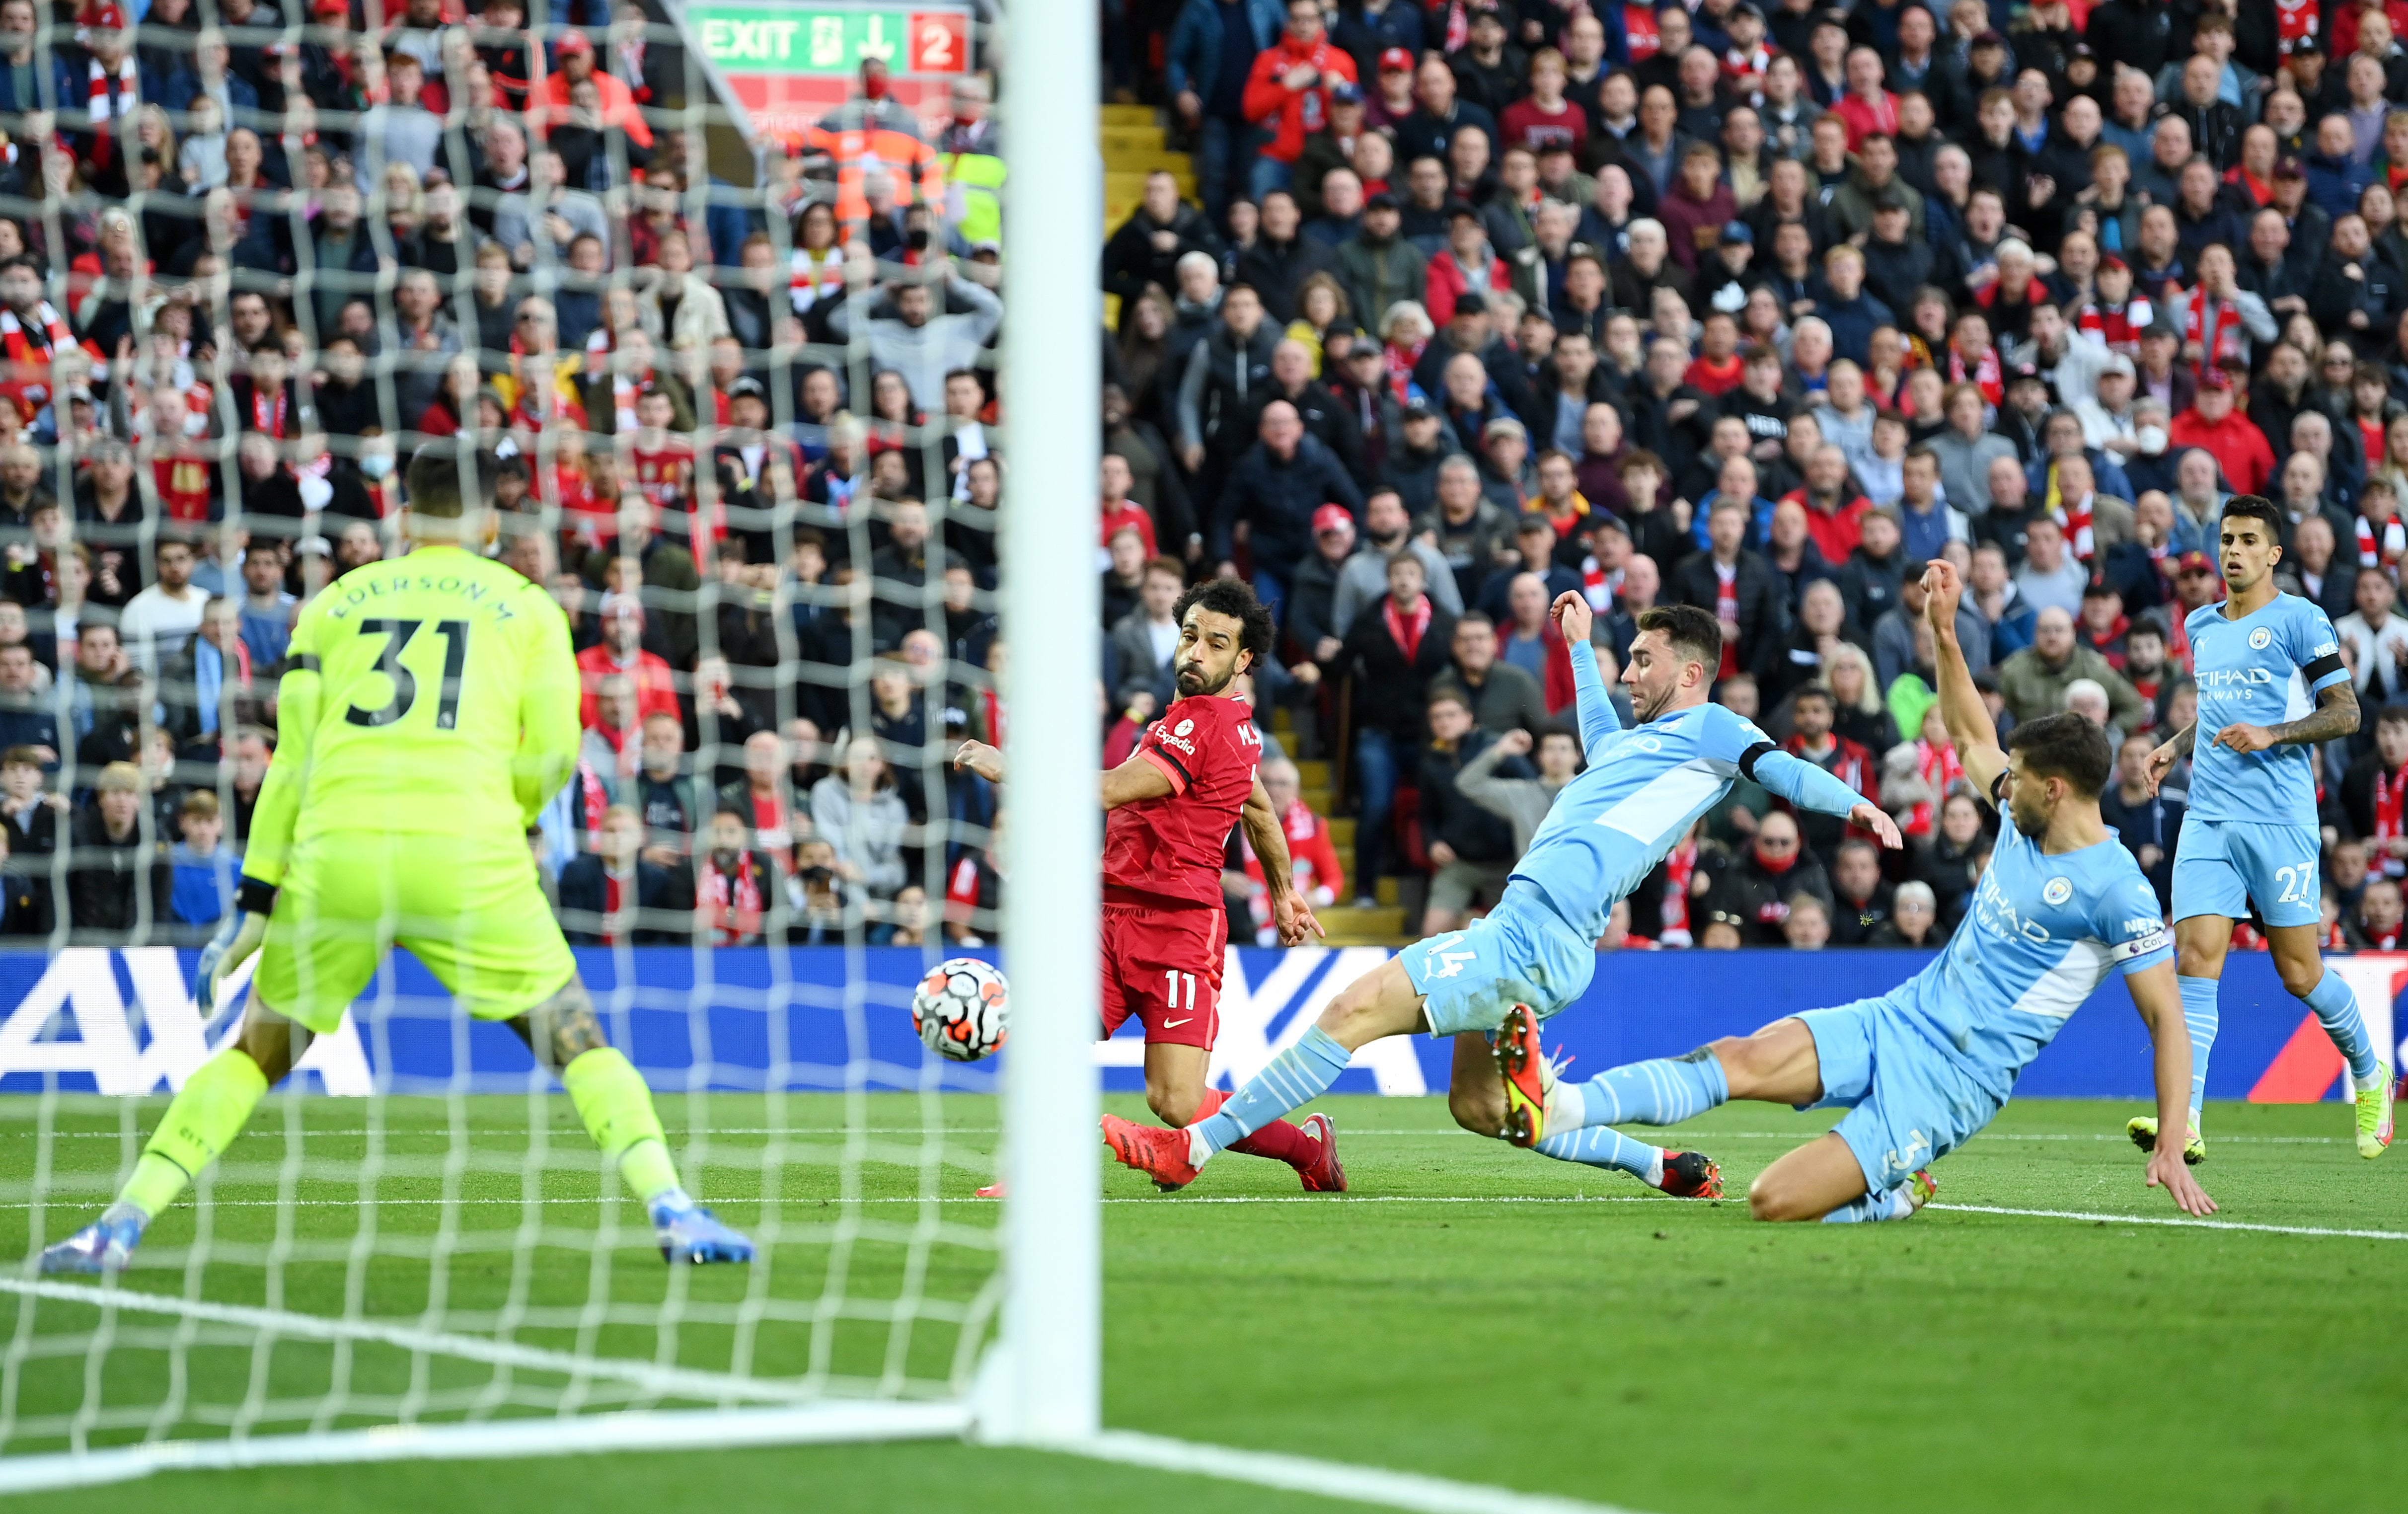 Mohamed Salah fires home Liverpool’s second goal in the draw with Manchester City